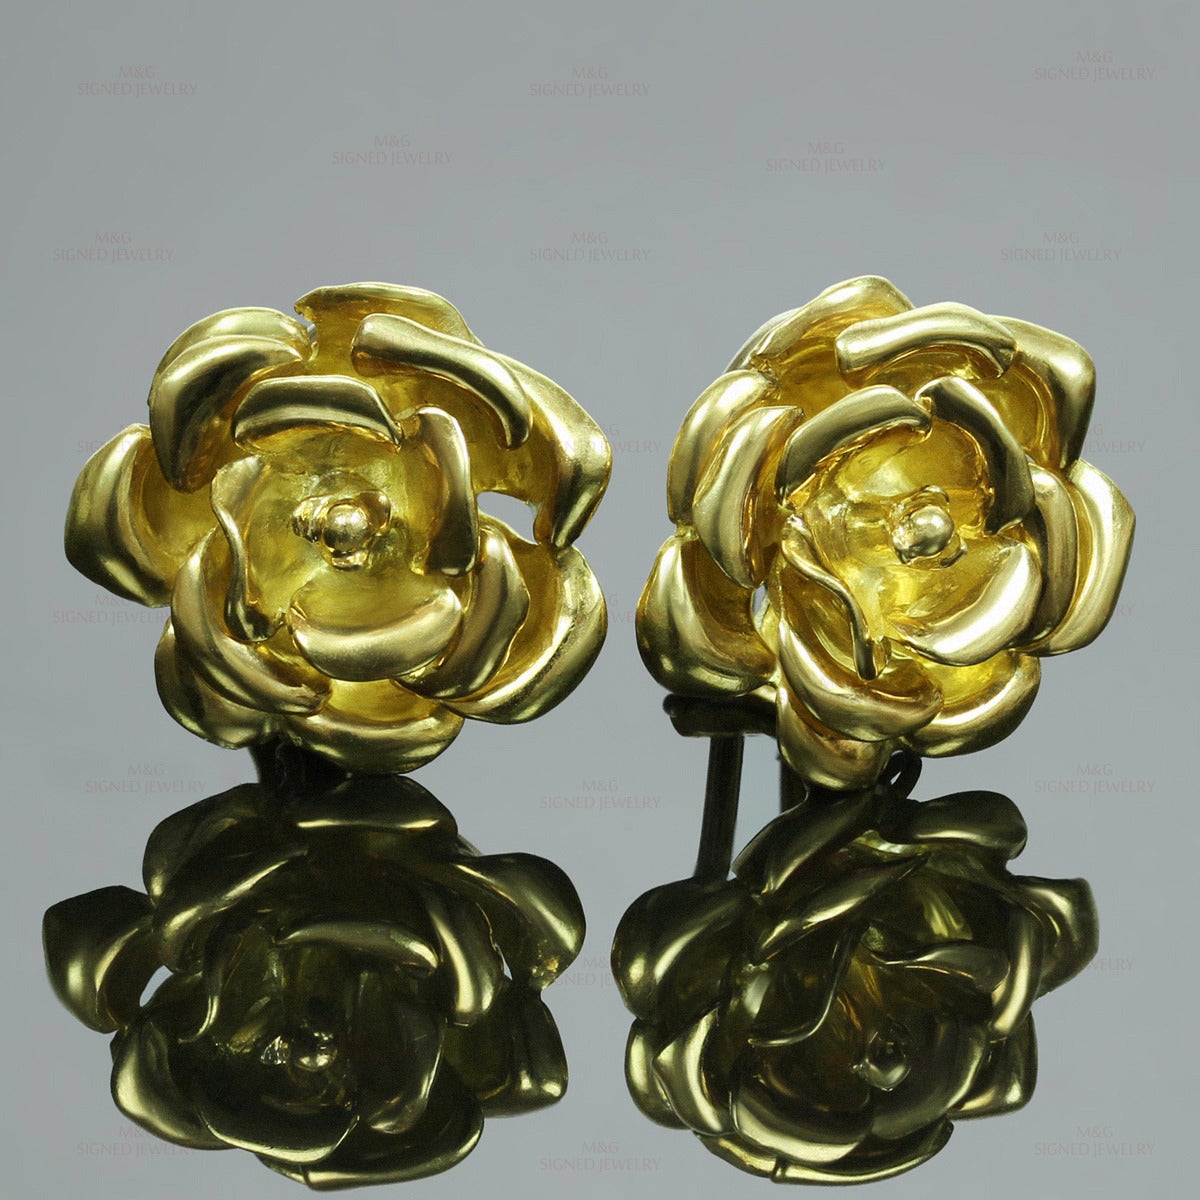 These Tiffany & Co. earrings feature a graceful rose-shaped design made in solid 18k yellow gold. Italy circa 1980s. Measurements: 0.78